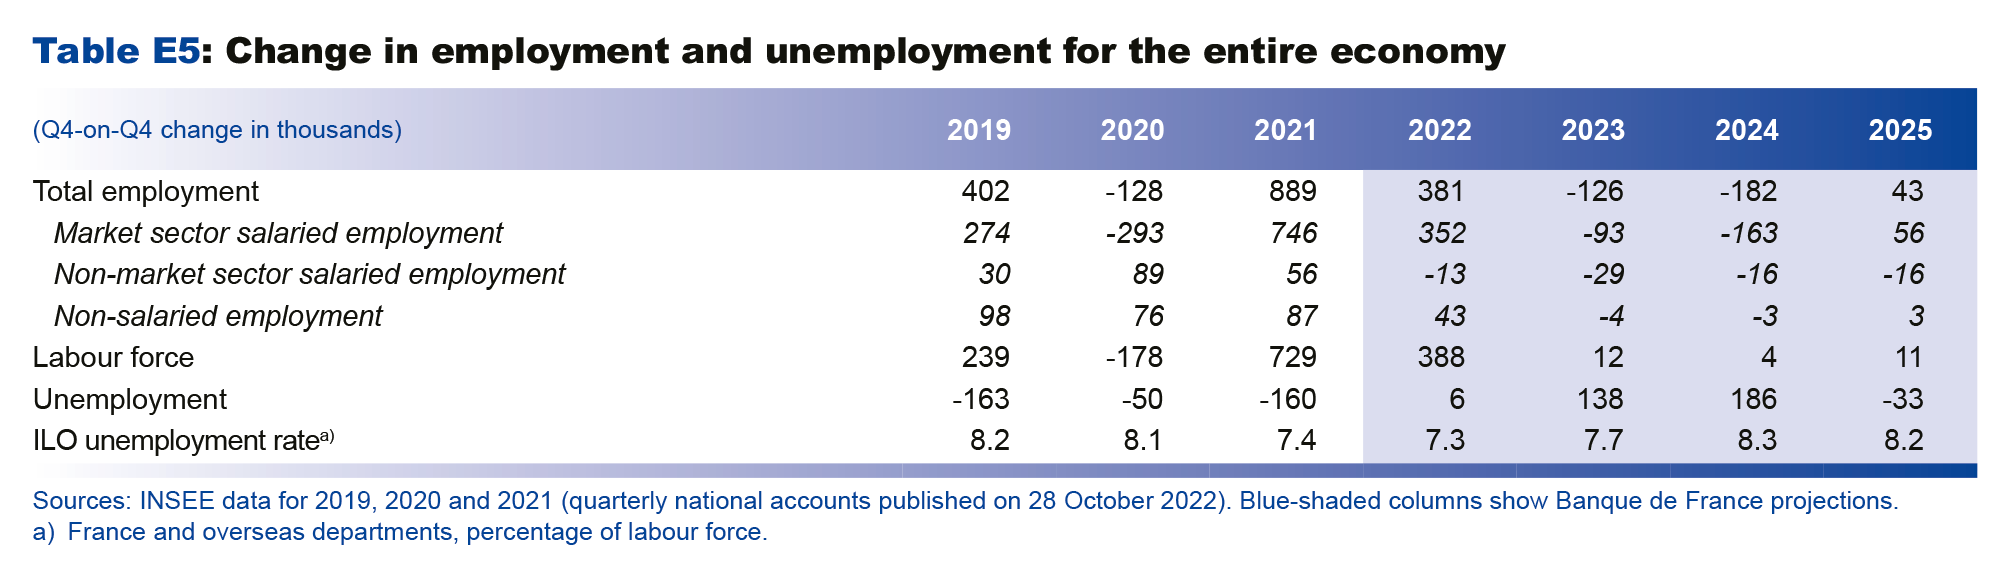 Macroeconomic projections – December 2022 - Change in employment and unemployment for the entire economy